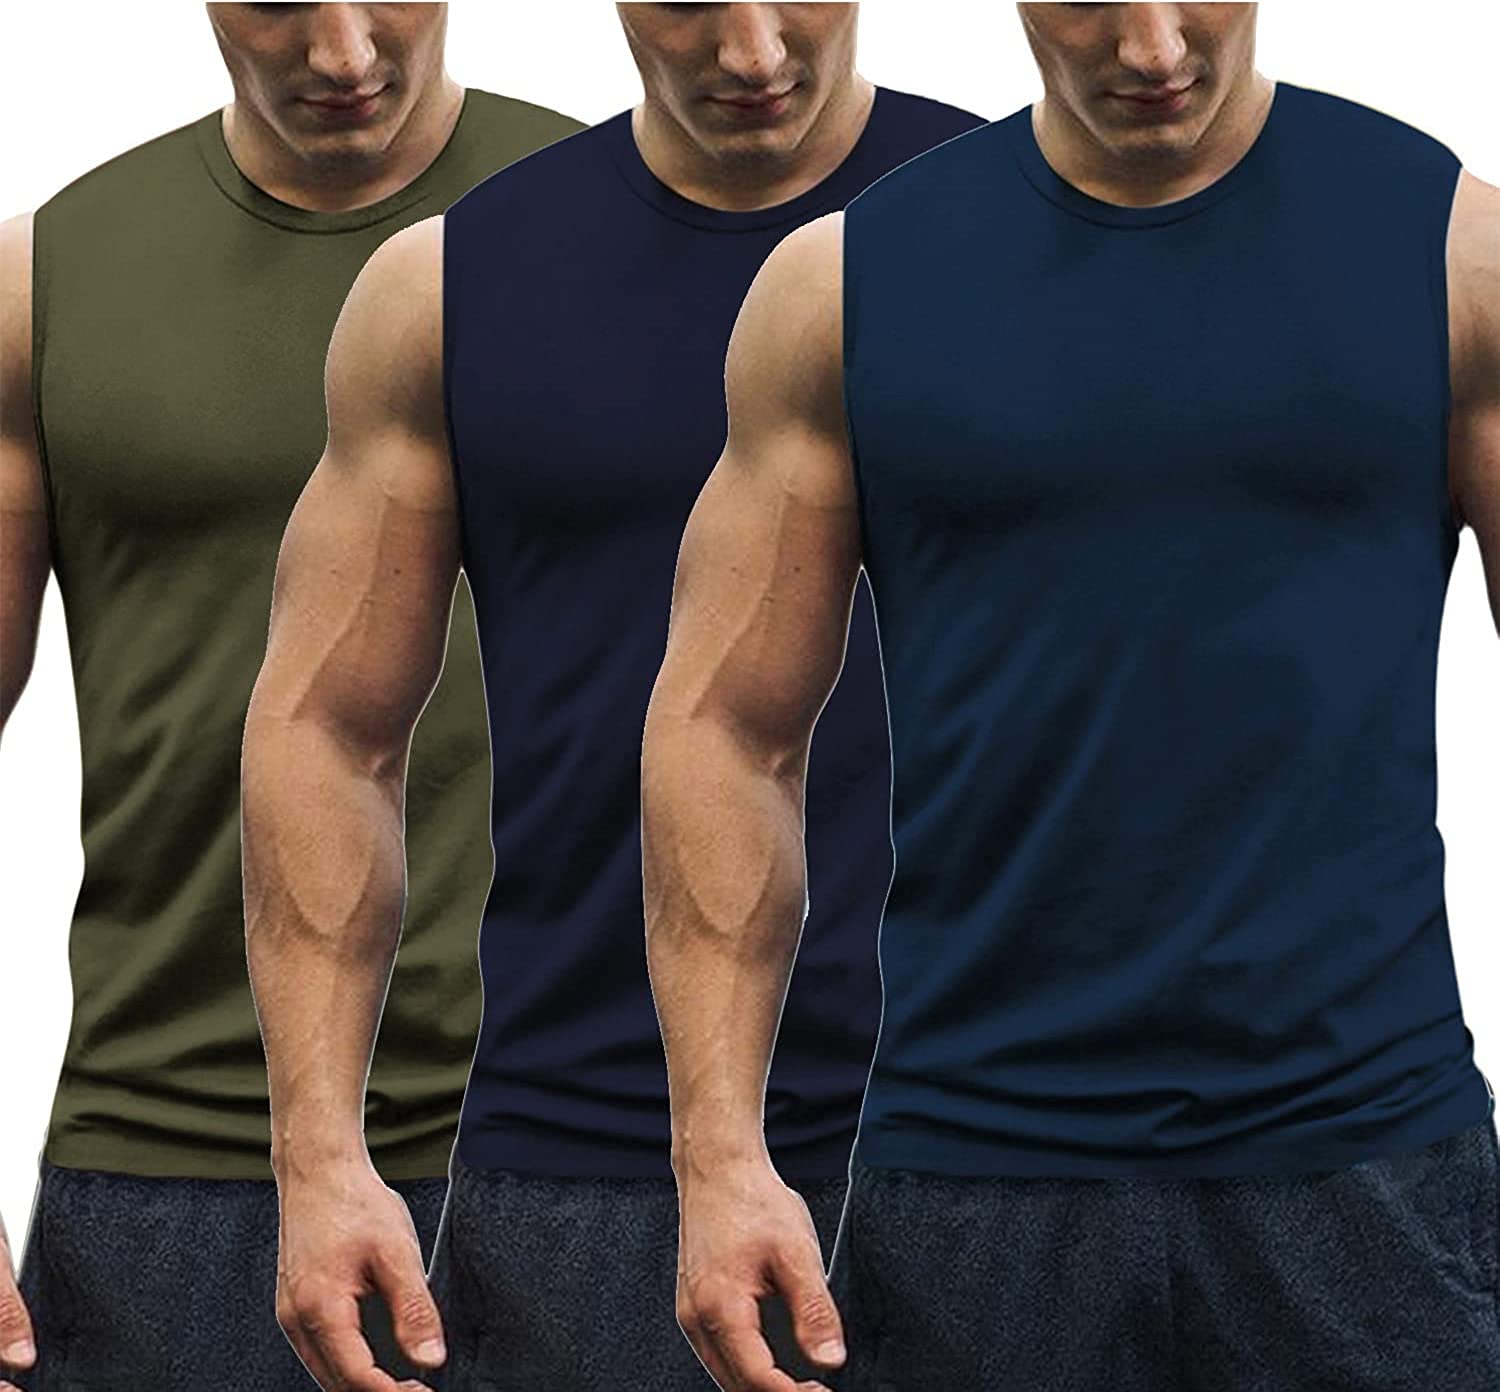 COOFANDY Men's Workout Tank Top Sleeveless Muscle Shirt Gym Training Fitness Athletic Sports Bodybuilding Tee 